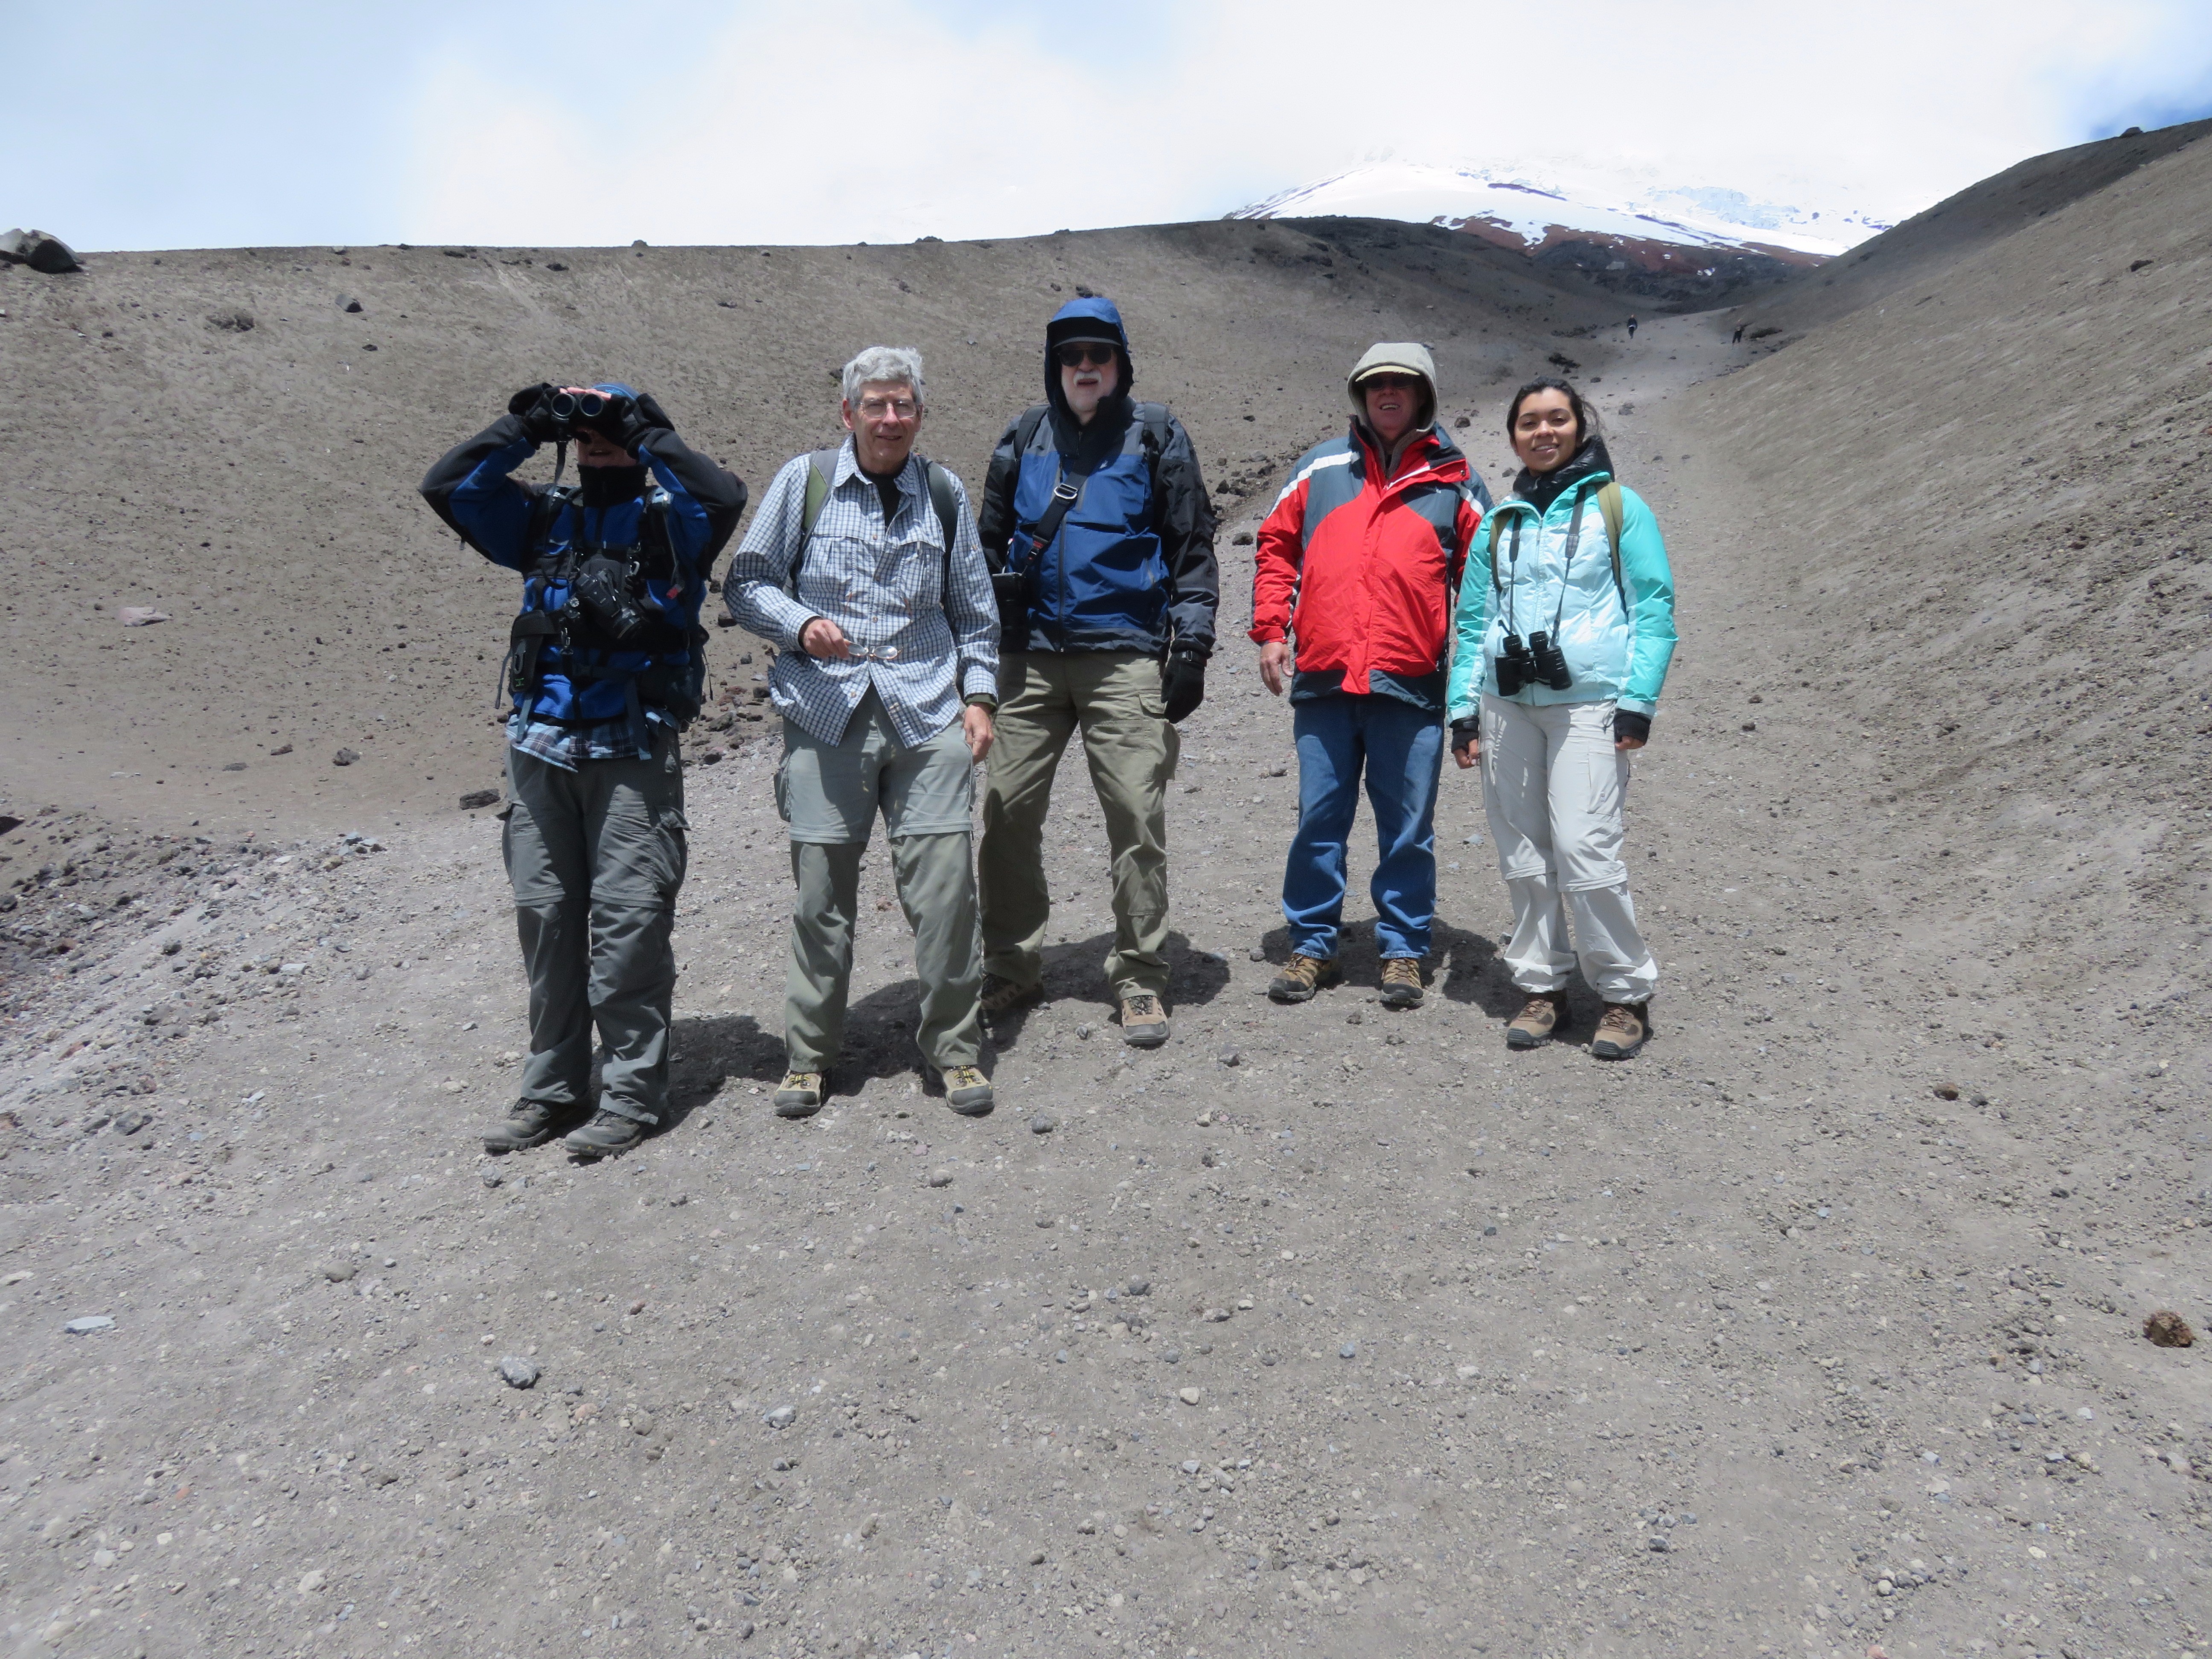 The Cotopaxi hike. From left to right: Mark Armstrong, Ken Bays, Rich Leu, John Hamilton, and their guide Anna.